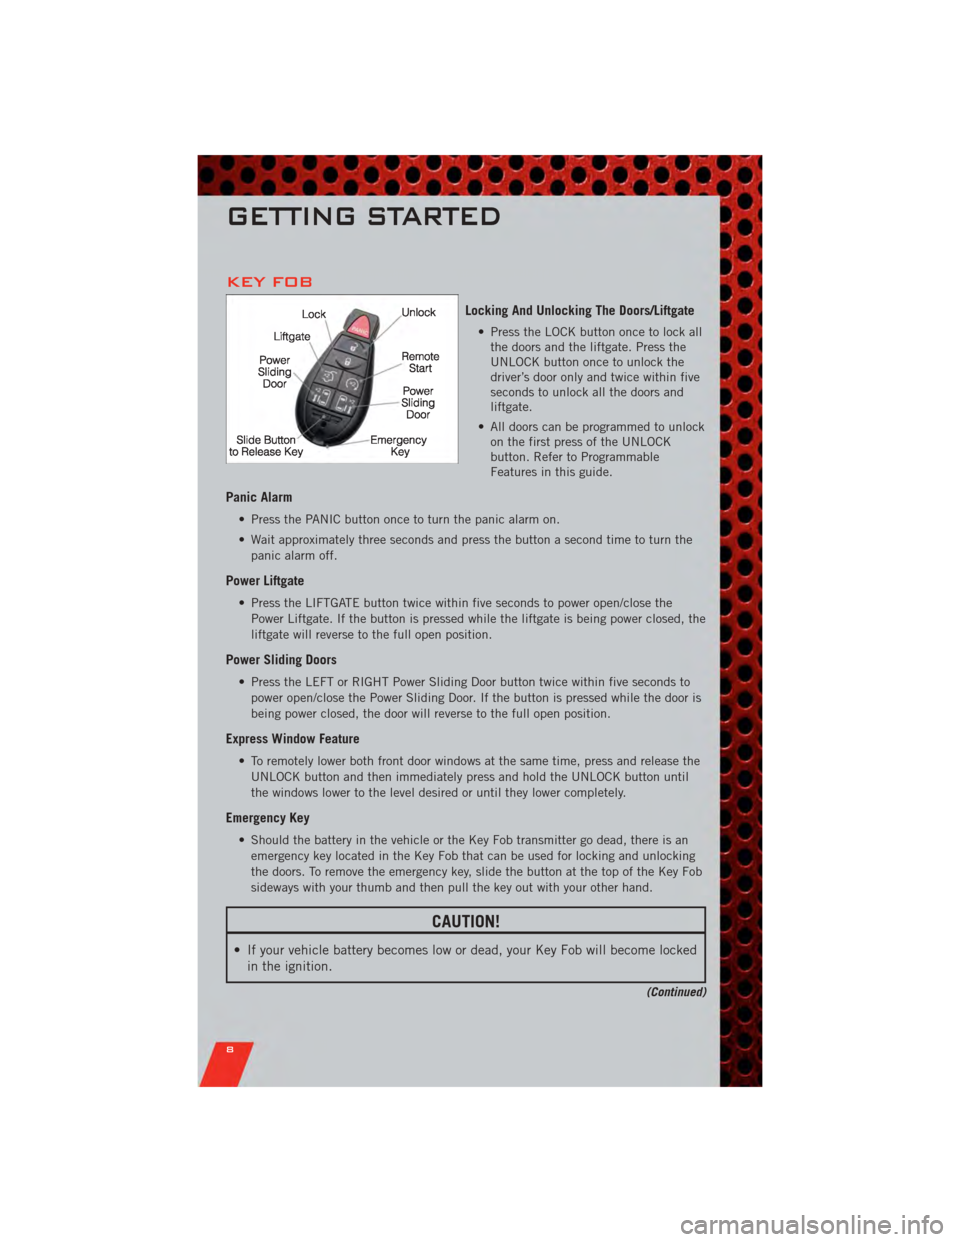 DODGE GRAND CARAVAN 2011 5.G User Guide KEY FOB
Locking And Unlocking The Doors/Liftgate
• Press the LOCK button once to lock allthe doors and the liftgate. Press the
UNLOCK button once to unlock the
driver’s door only and twice within 